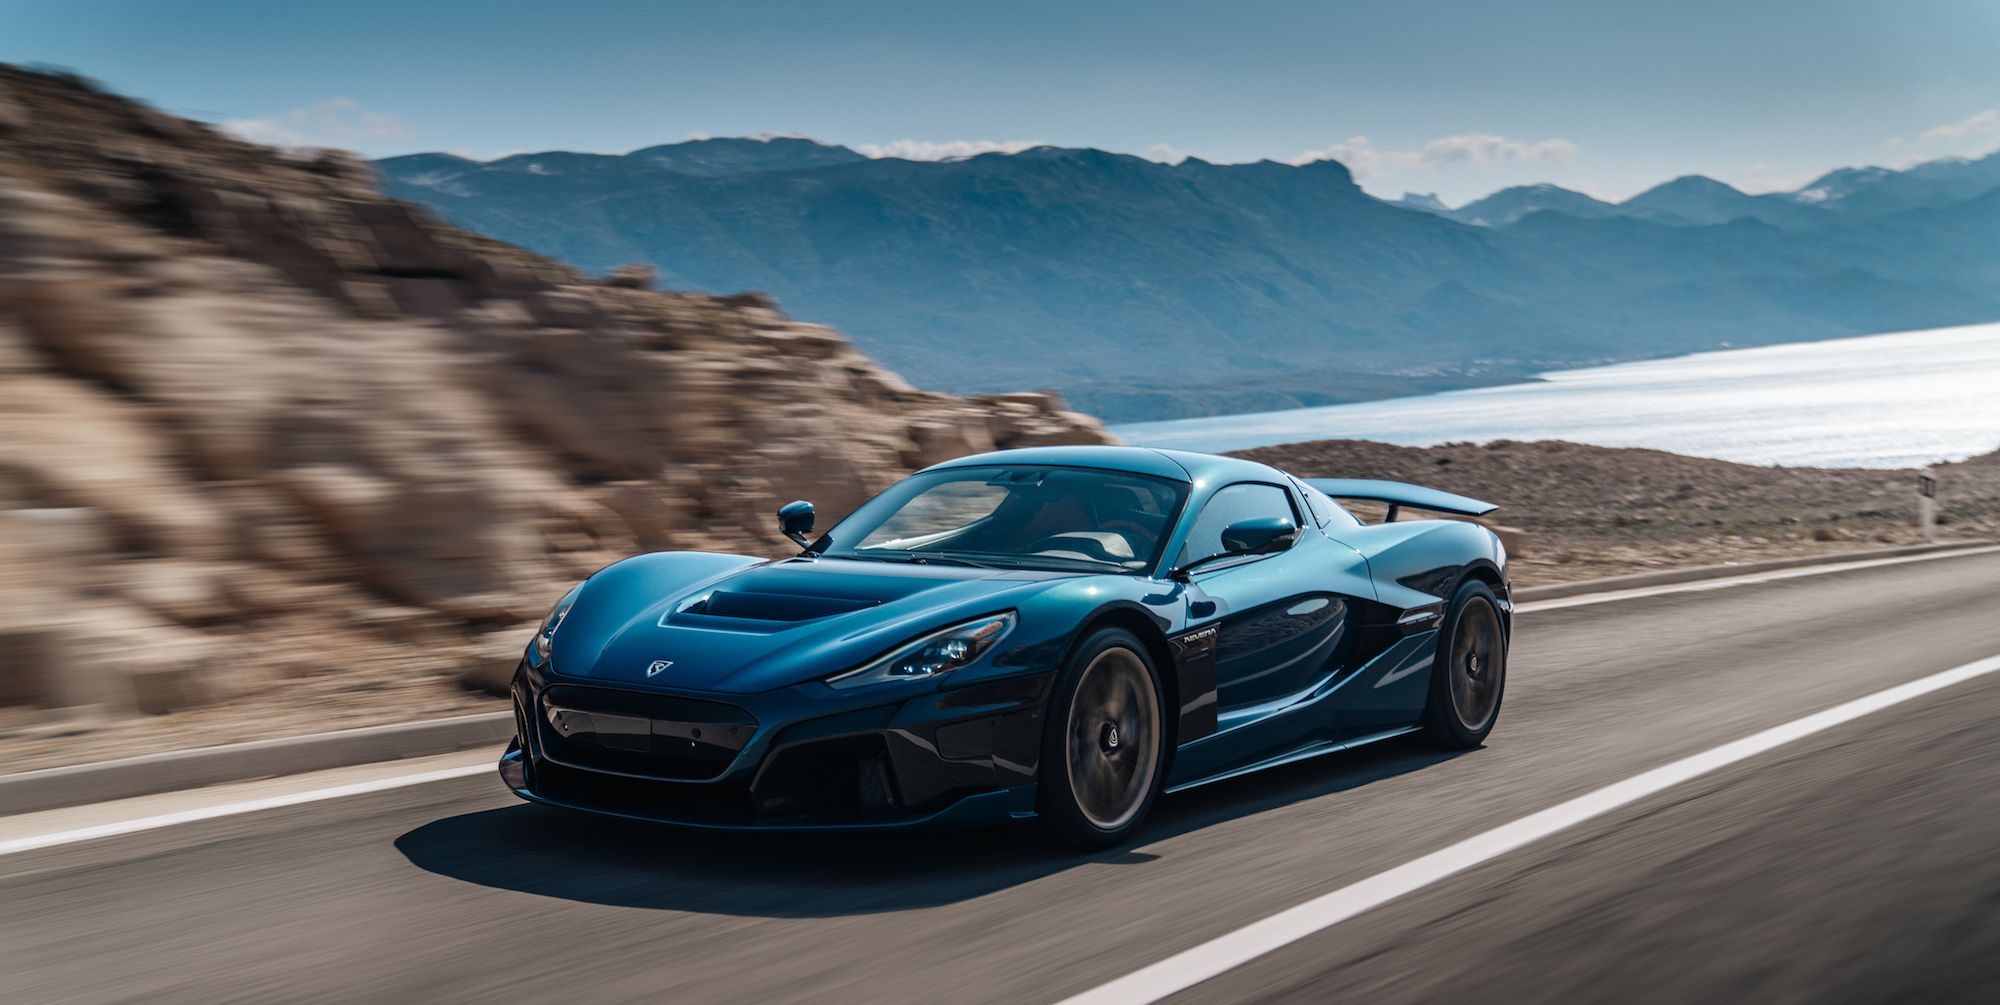 Rimac and BMW Take on the Electric Future Together